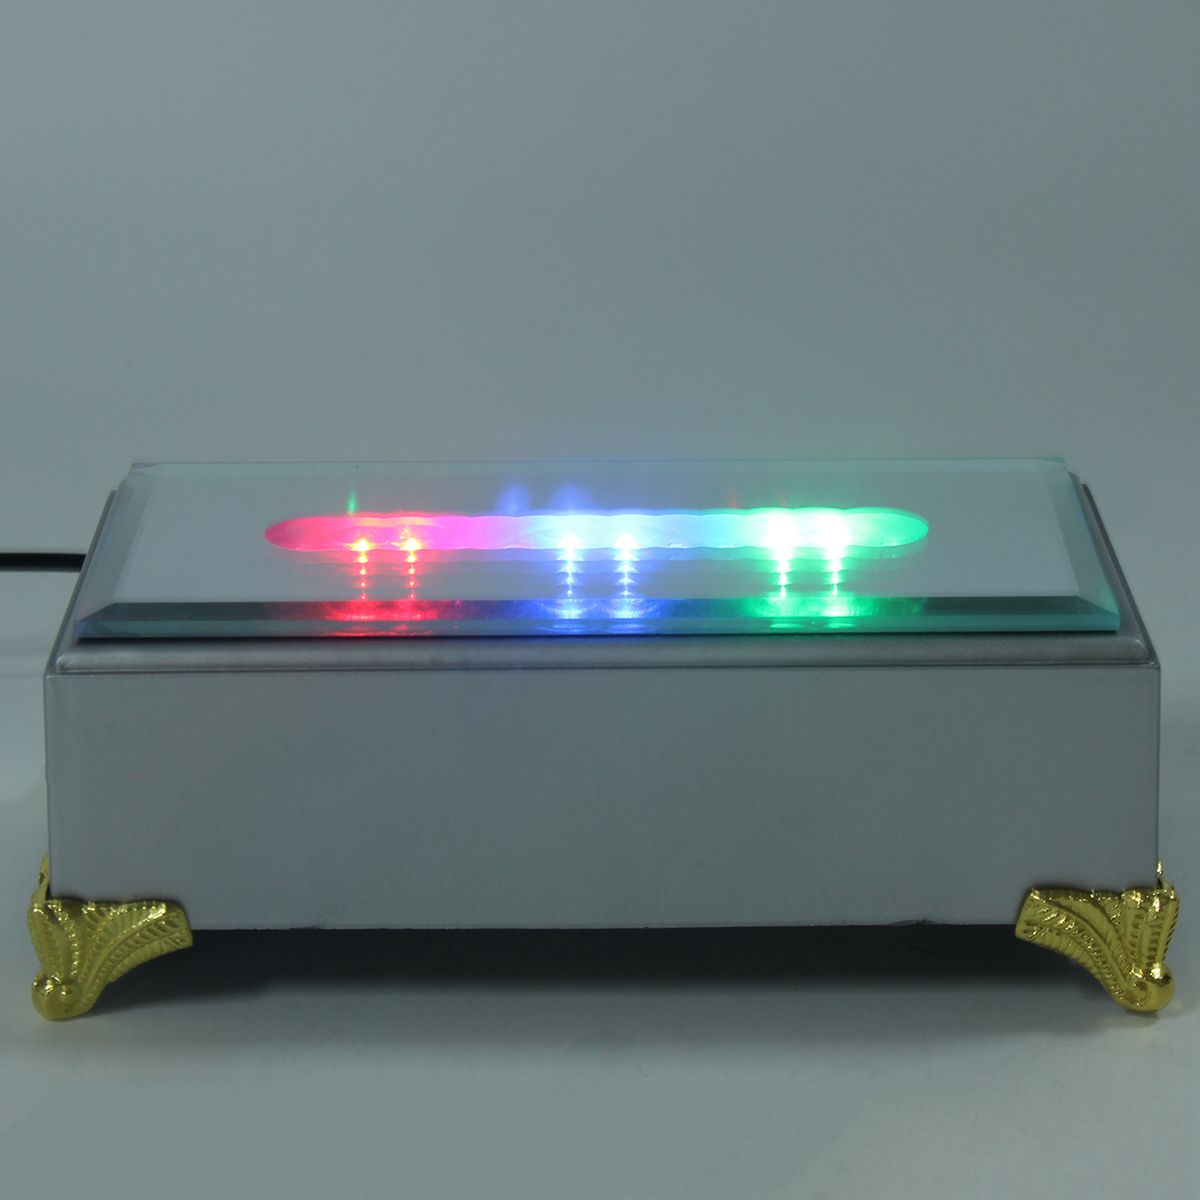 USB-12-LED-White-Colorful-Light-Stand-Light-Base-Crystal-Glass-Display-Adapter-1466195